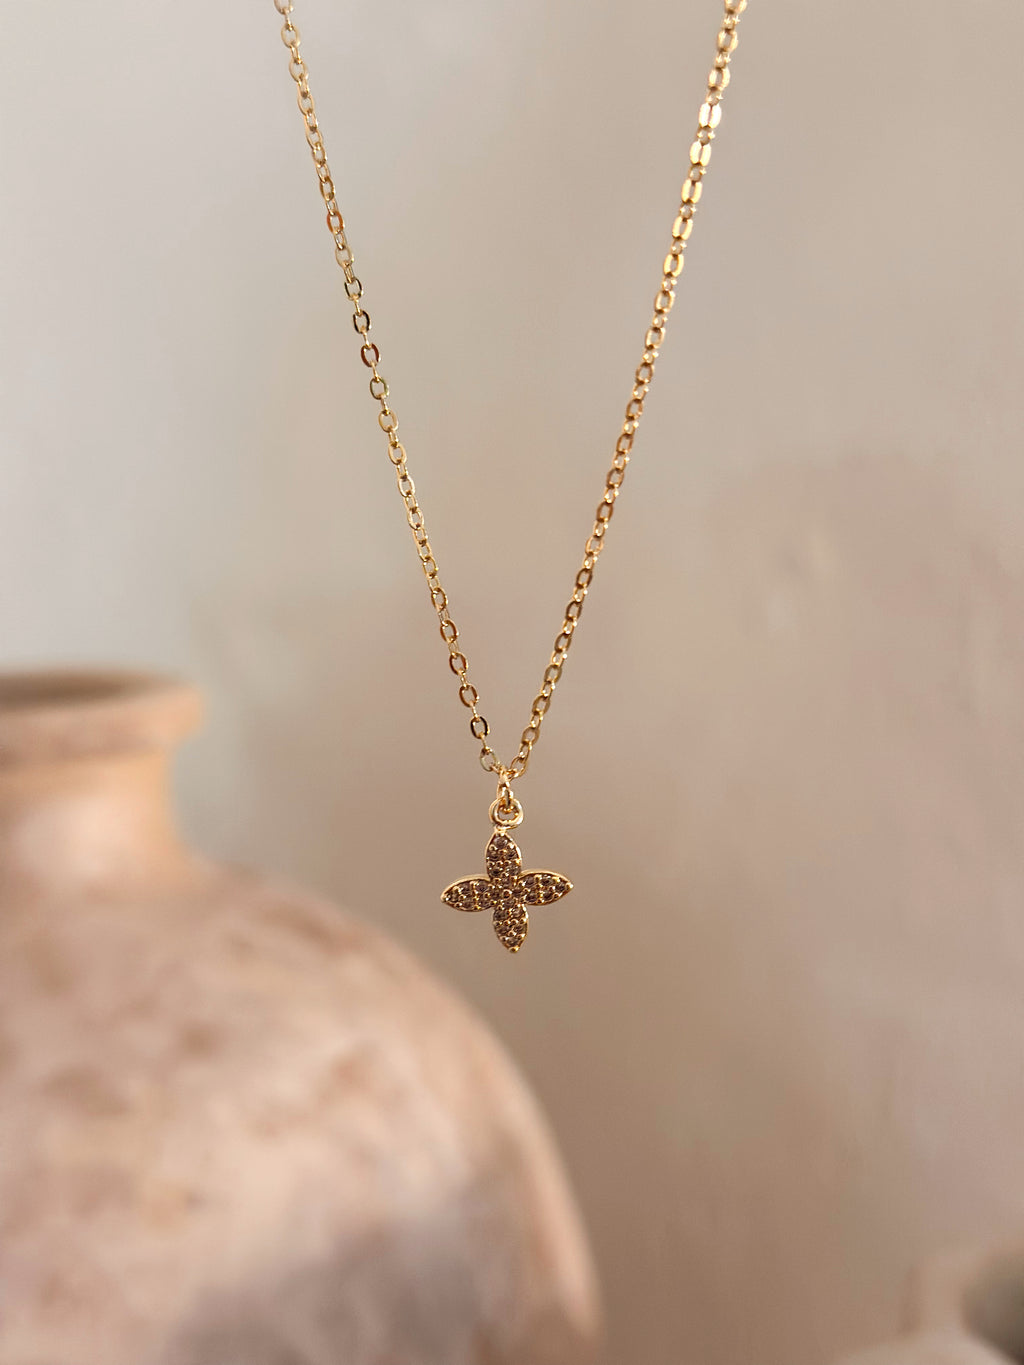 CLEEF DAINTY NECKLACE